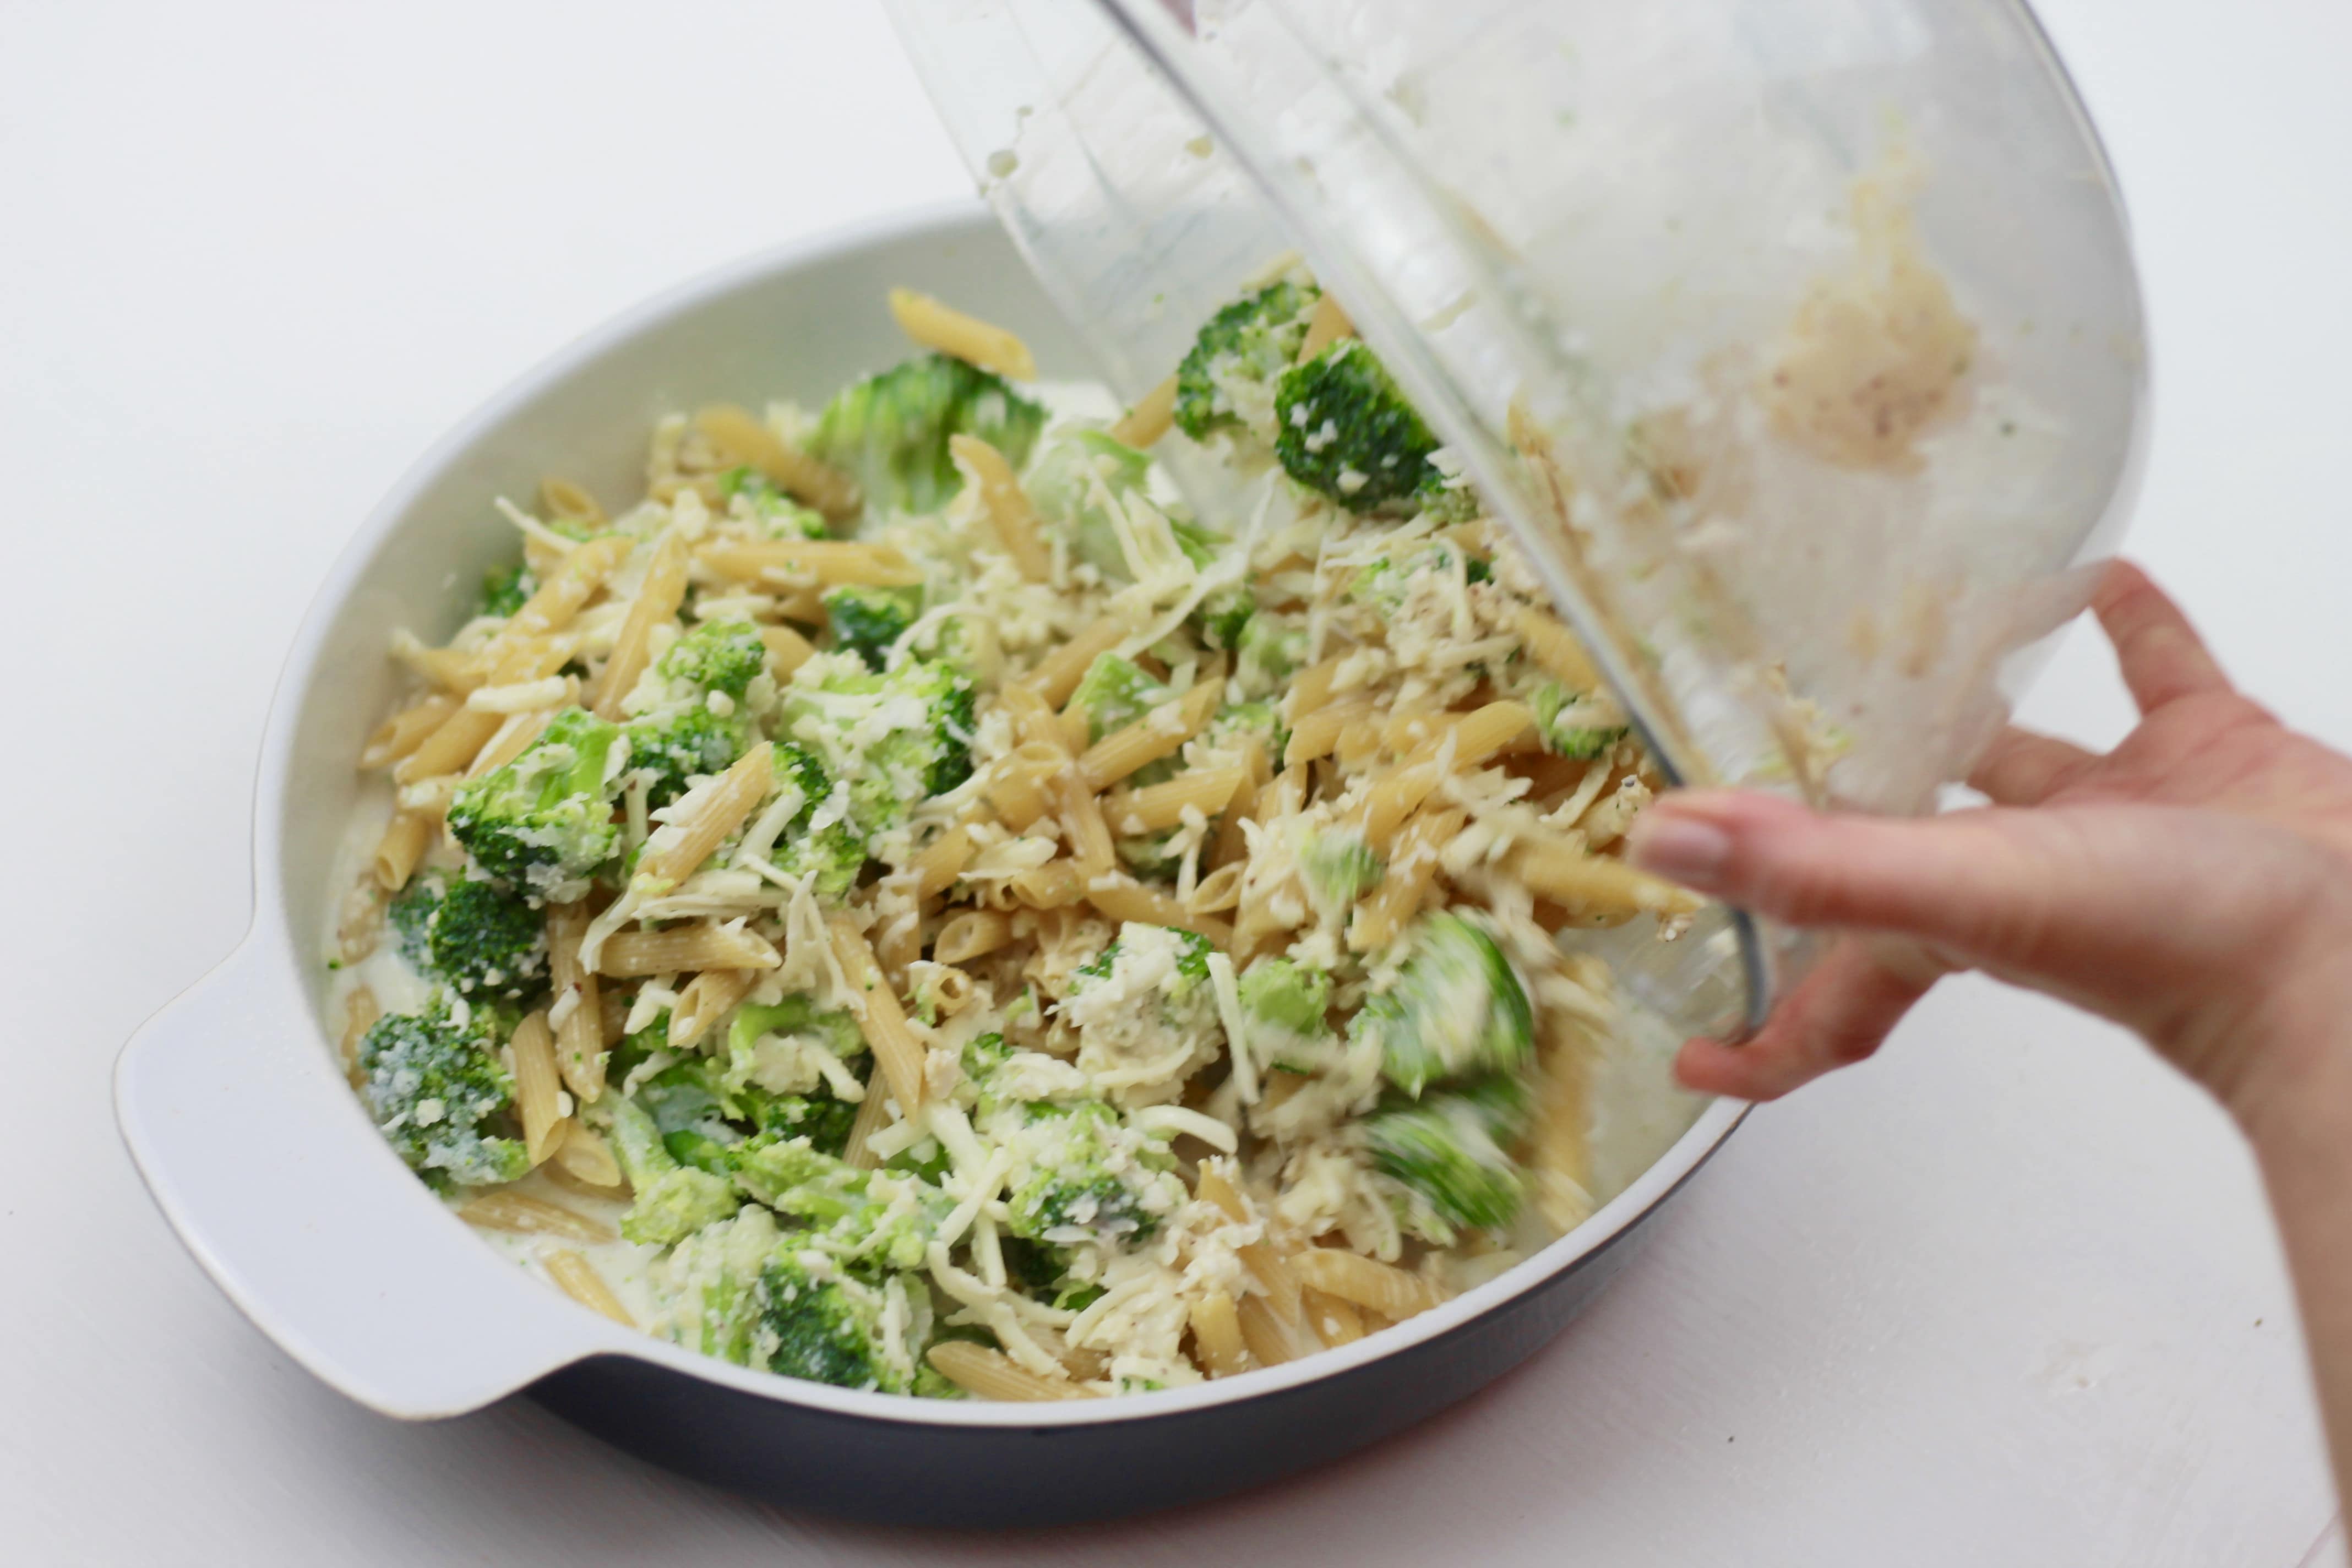 Broccoli, pasta, and shredded cheese all mixed together and poured into a dish to be cook in the oven.